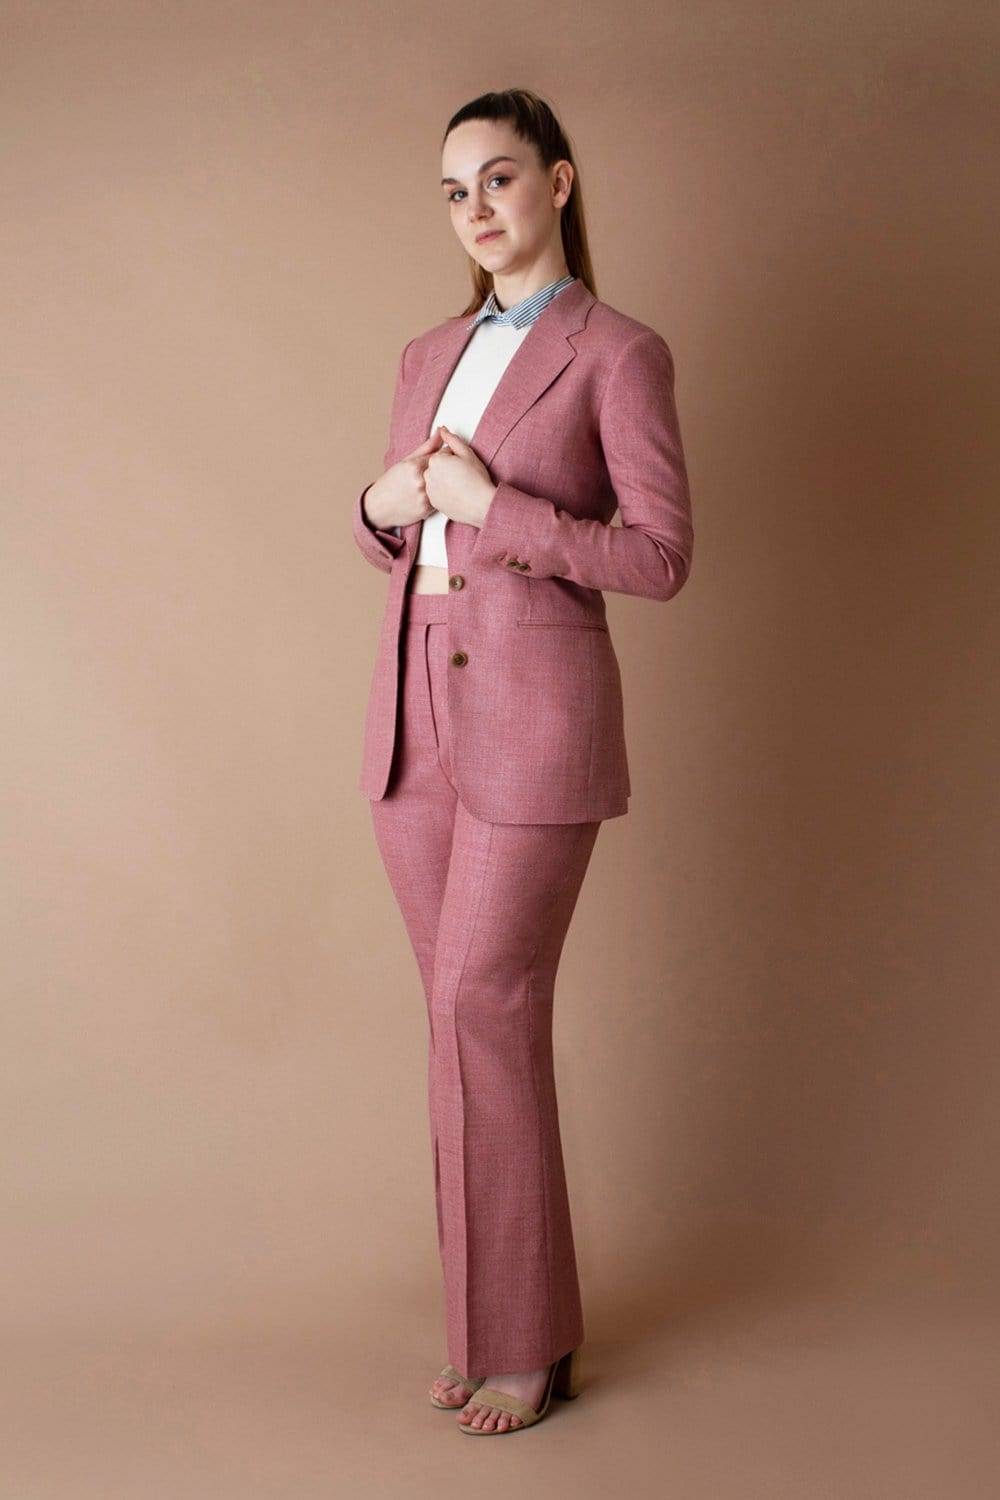 Suits for Women - Women's Suits & Tailoring, House of Tailors